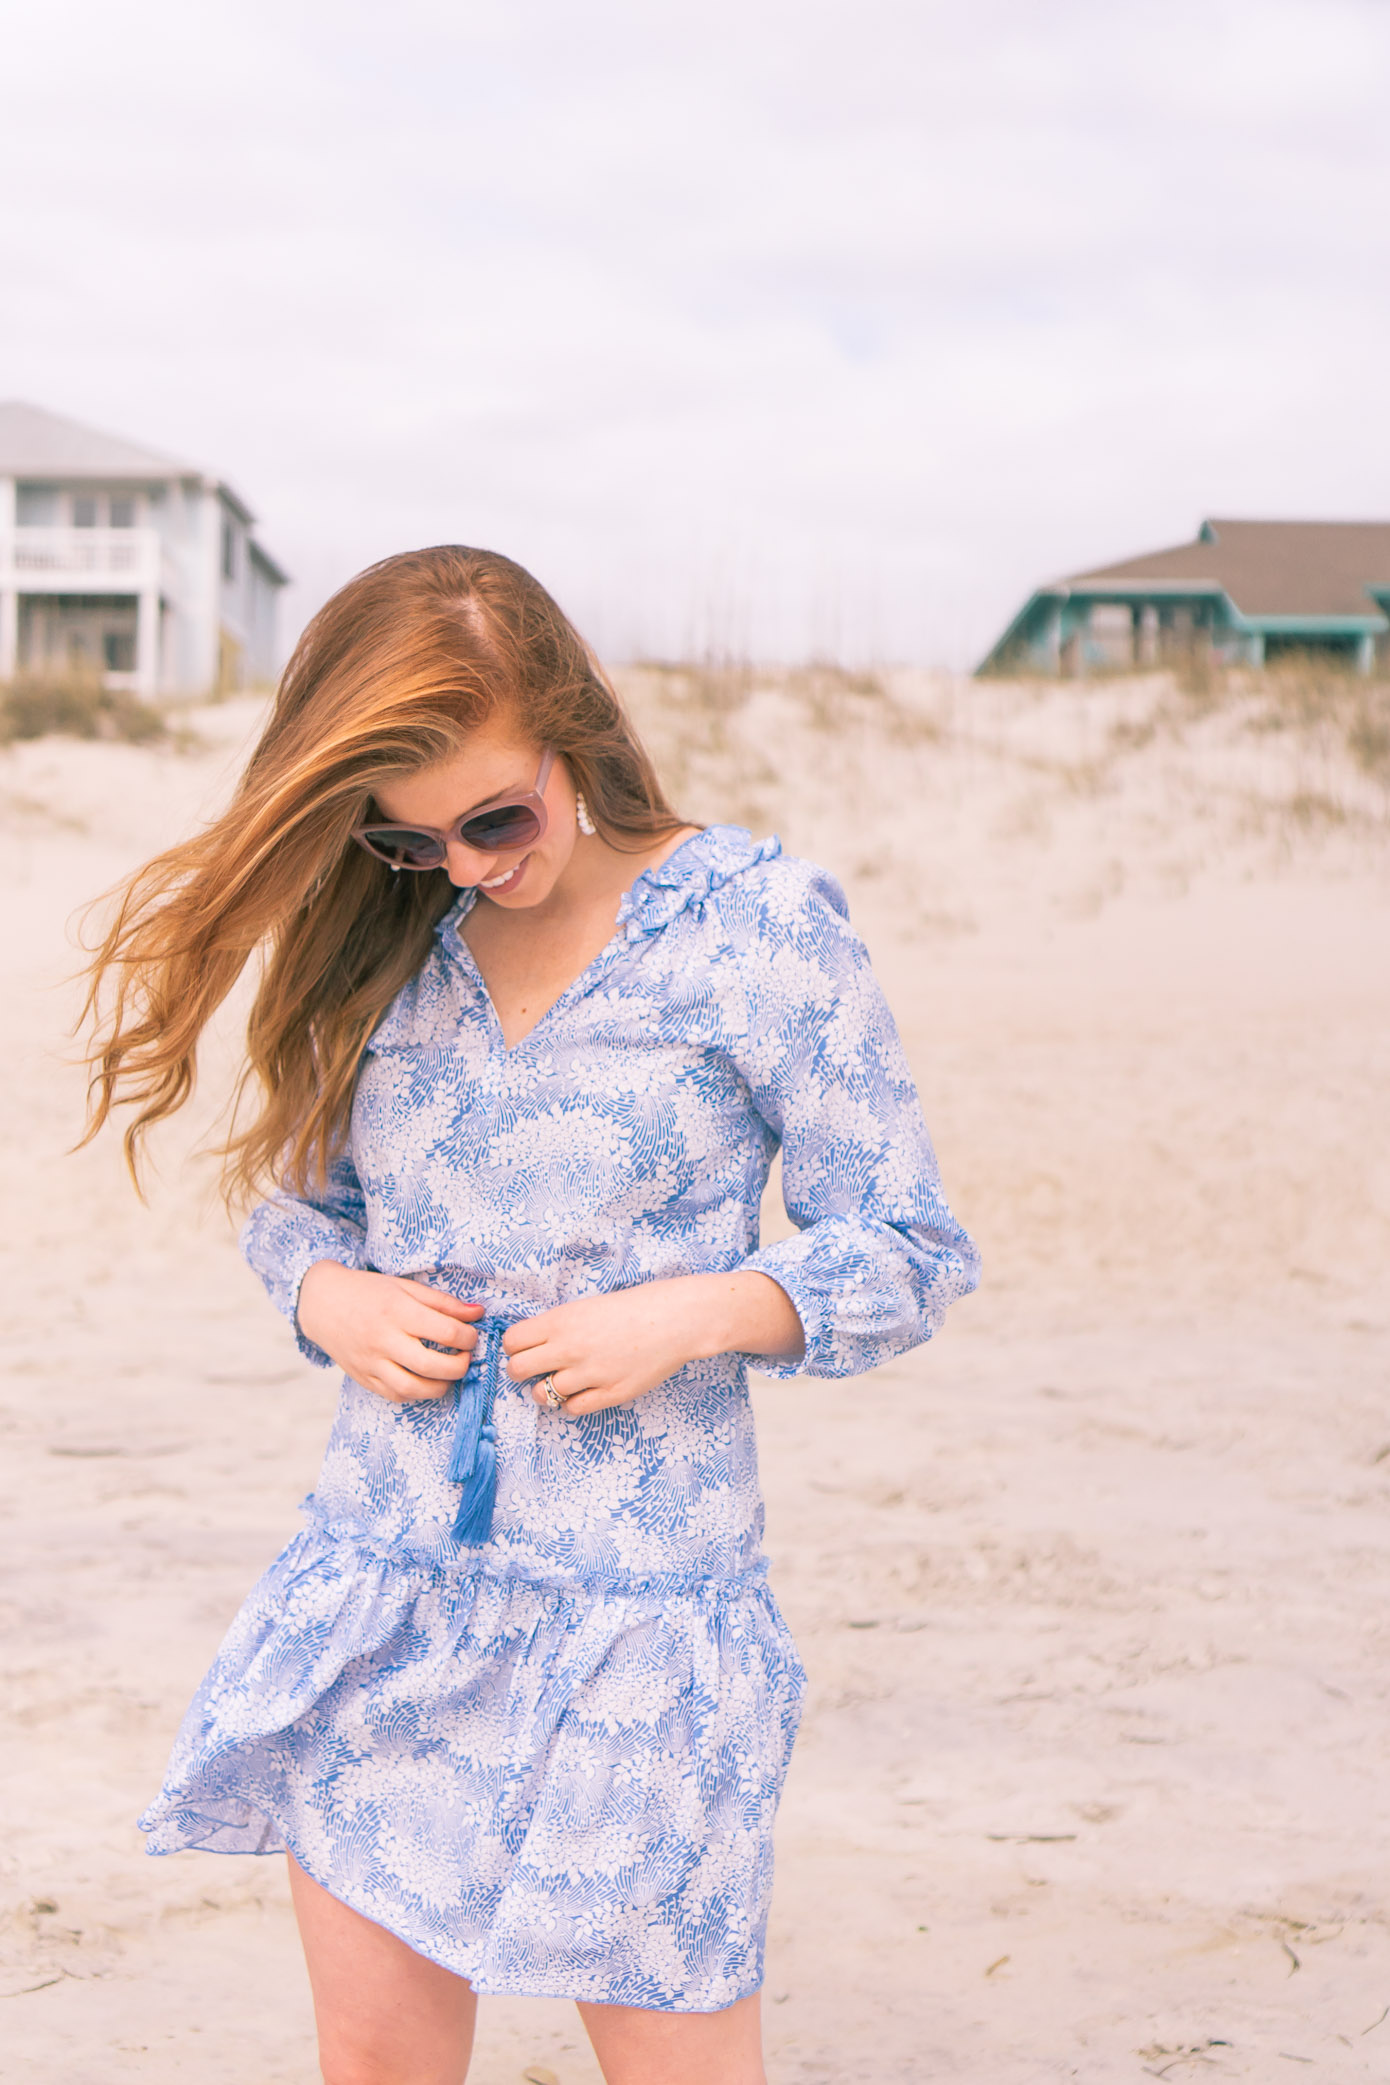 Blue & White Cover Up for the Beach | Carolina Beach Travel Guide | Louella Reese Life & Style Blog